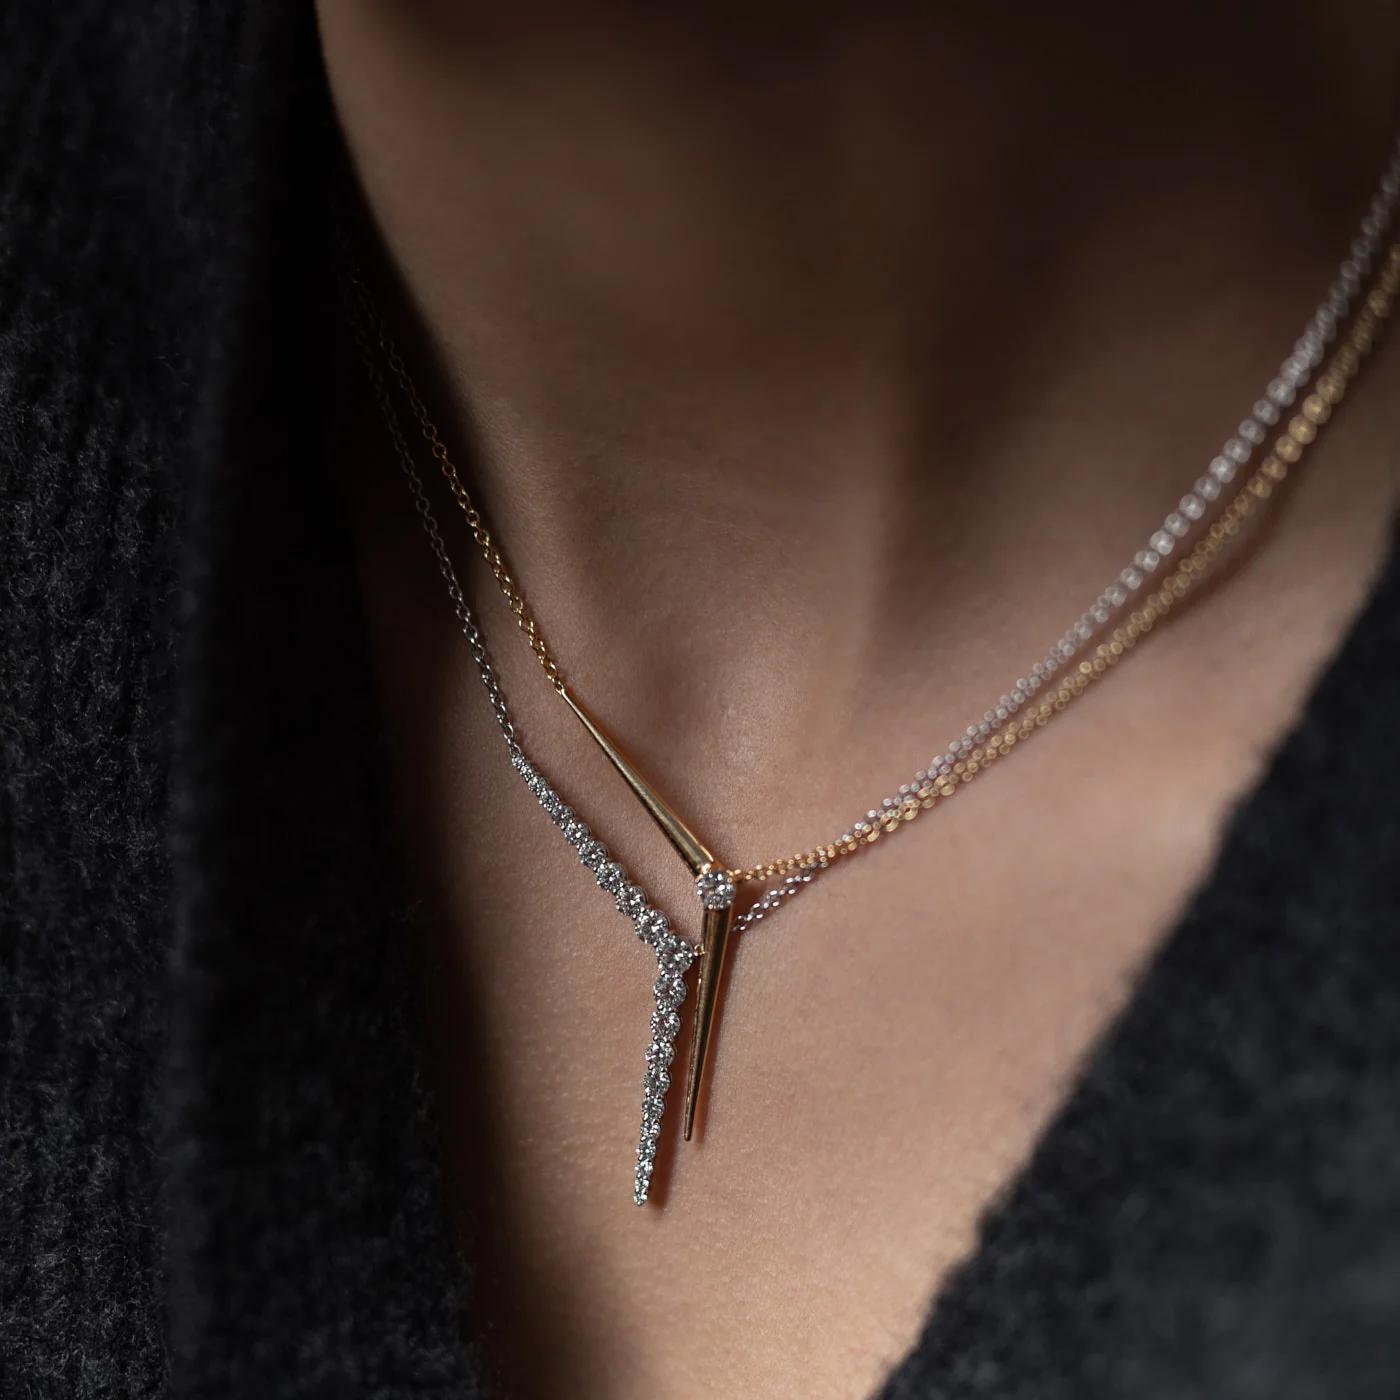 Seamlessly blending feminine lines and geometric shapes, this necklace is set with glistening diamonds that beautifully highlight the unique integrated “Y” pendant.

18K White Gold
Approx. 1.61cts diamonds
49mm pendant length with 30mm pendant